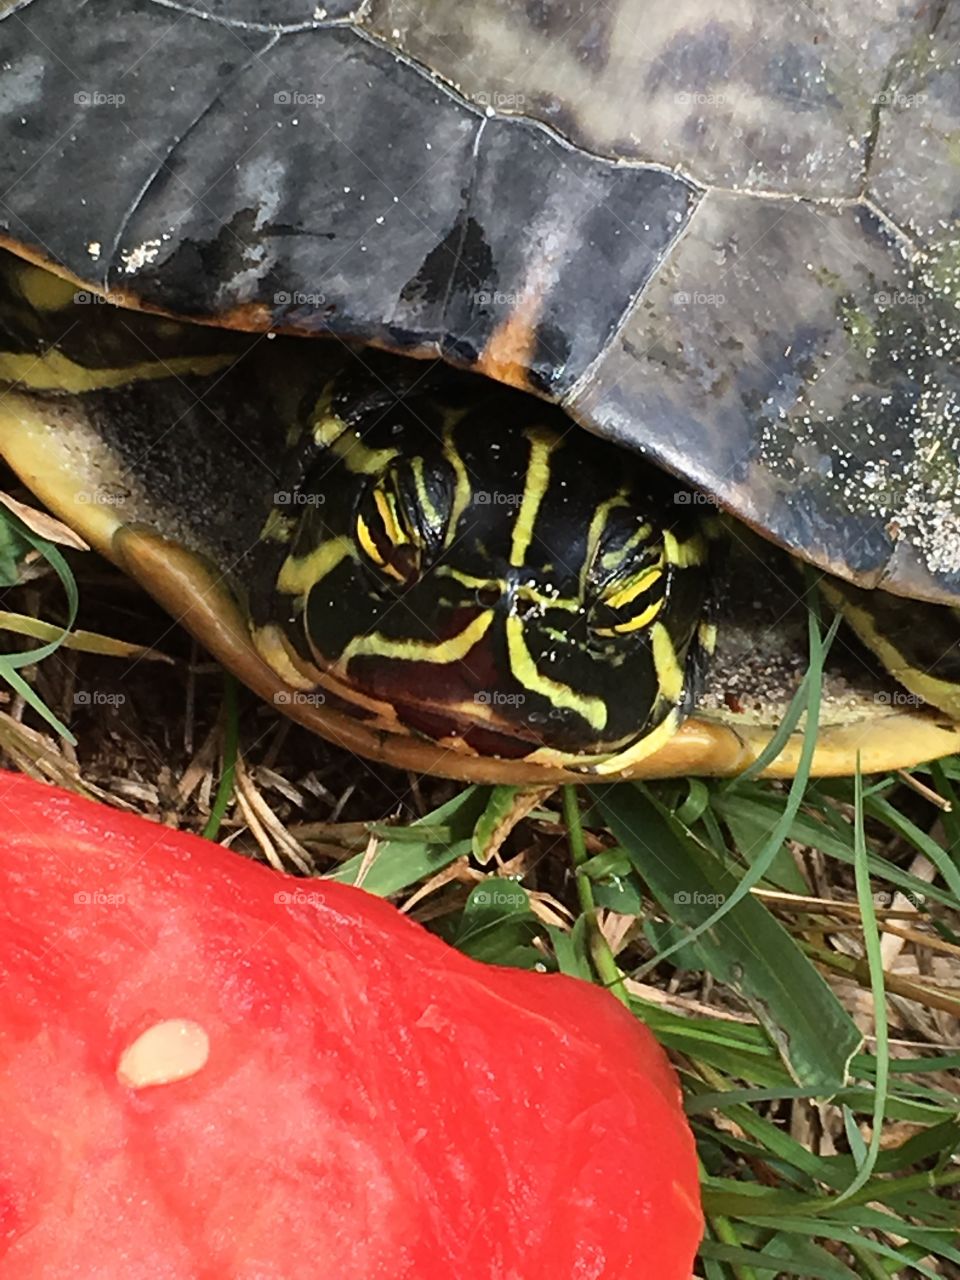 Green turtle eating watermelon in Florida 🍉